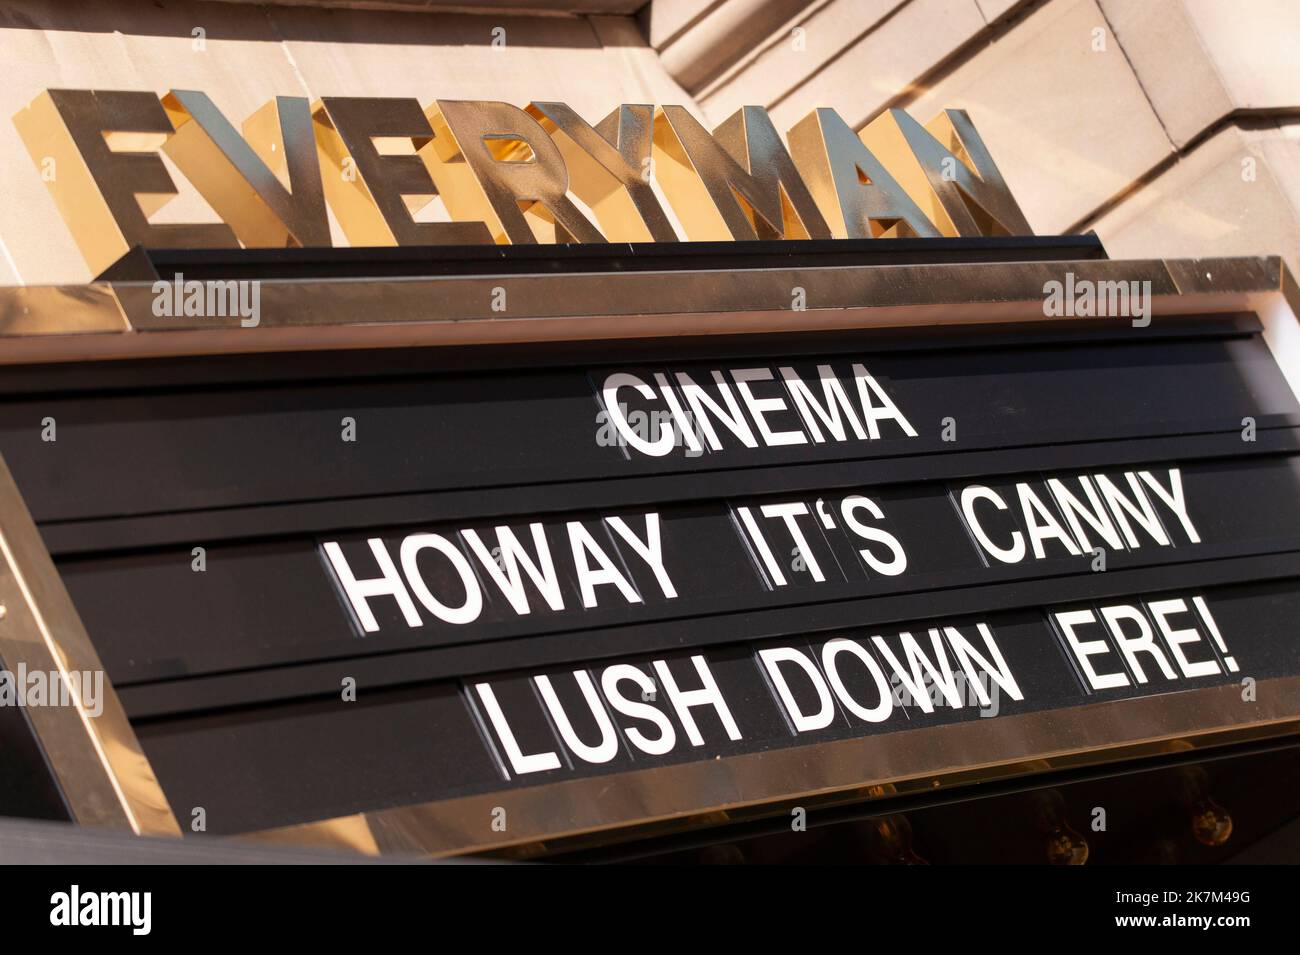 The Everyman Cinema, Newcastle-upon-Tyne - Howay it's canny üppig down ere! signieren Stockfoto